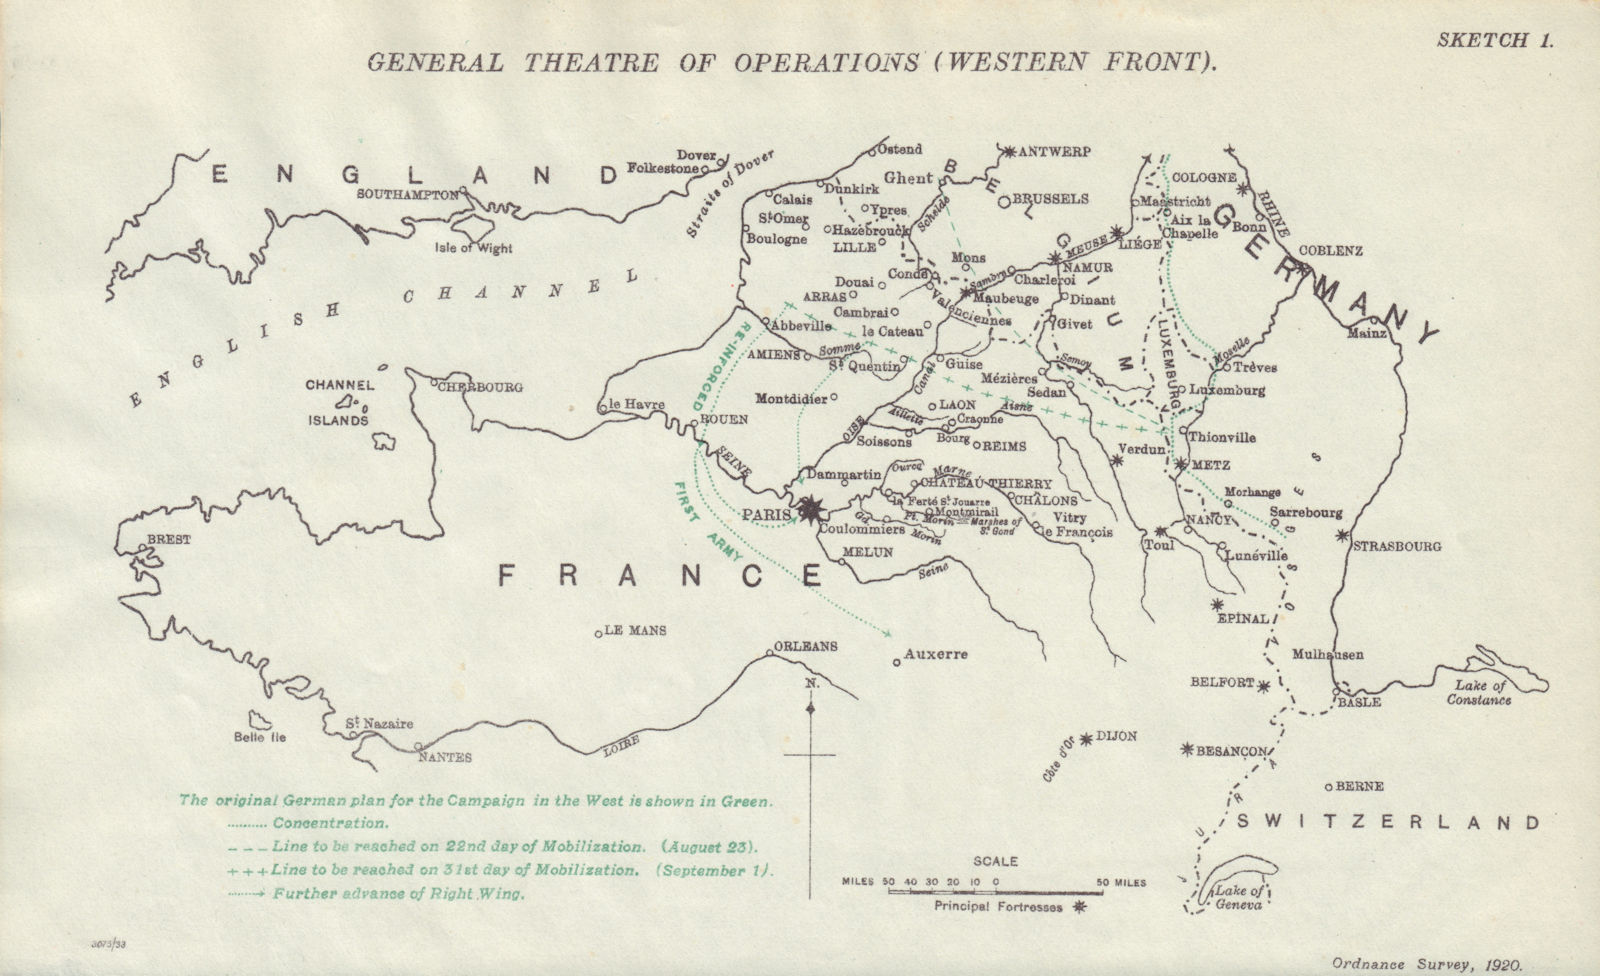 Western Front Theatre of Operations. German Plan 1914. First World War. 1933 map